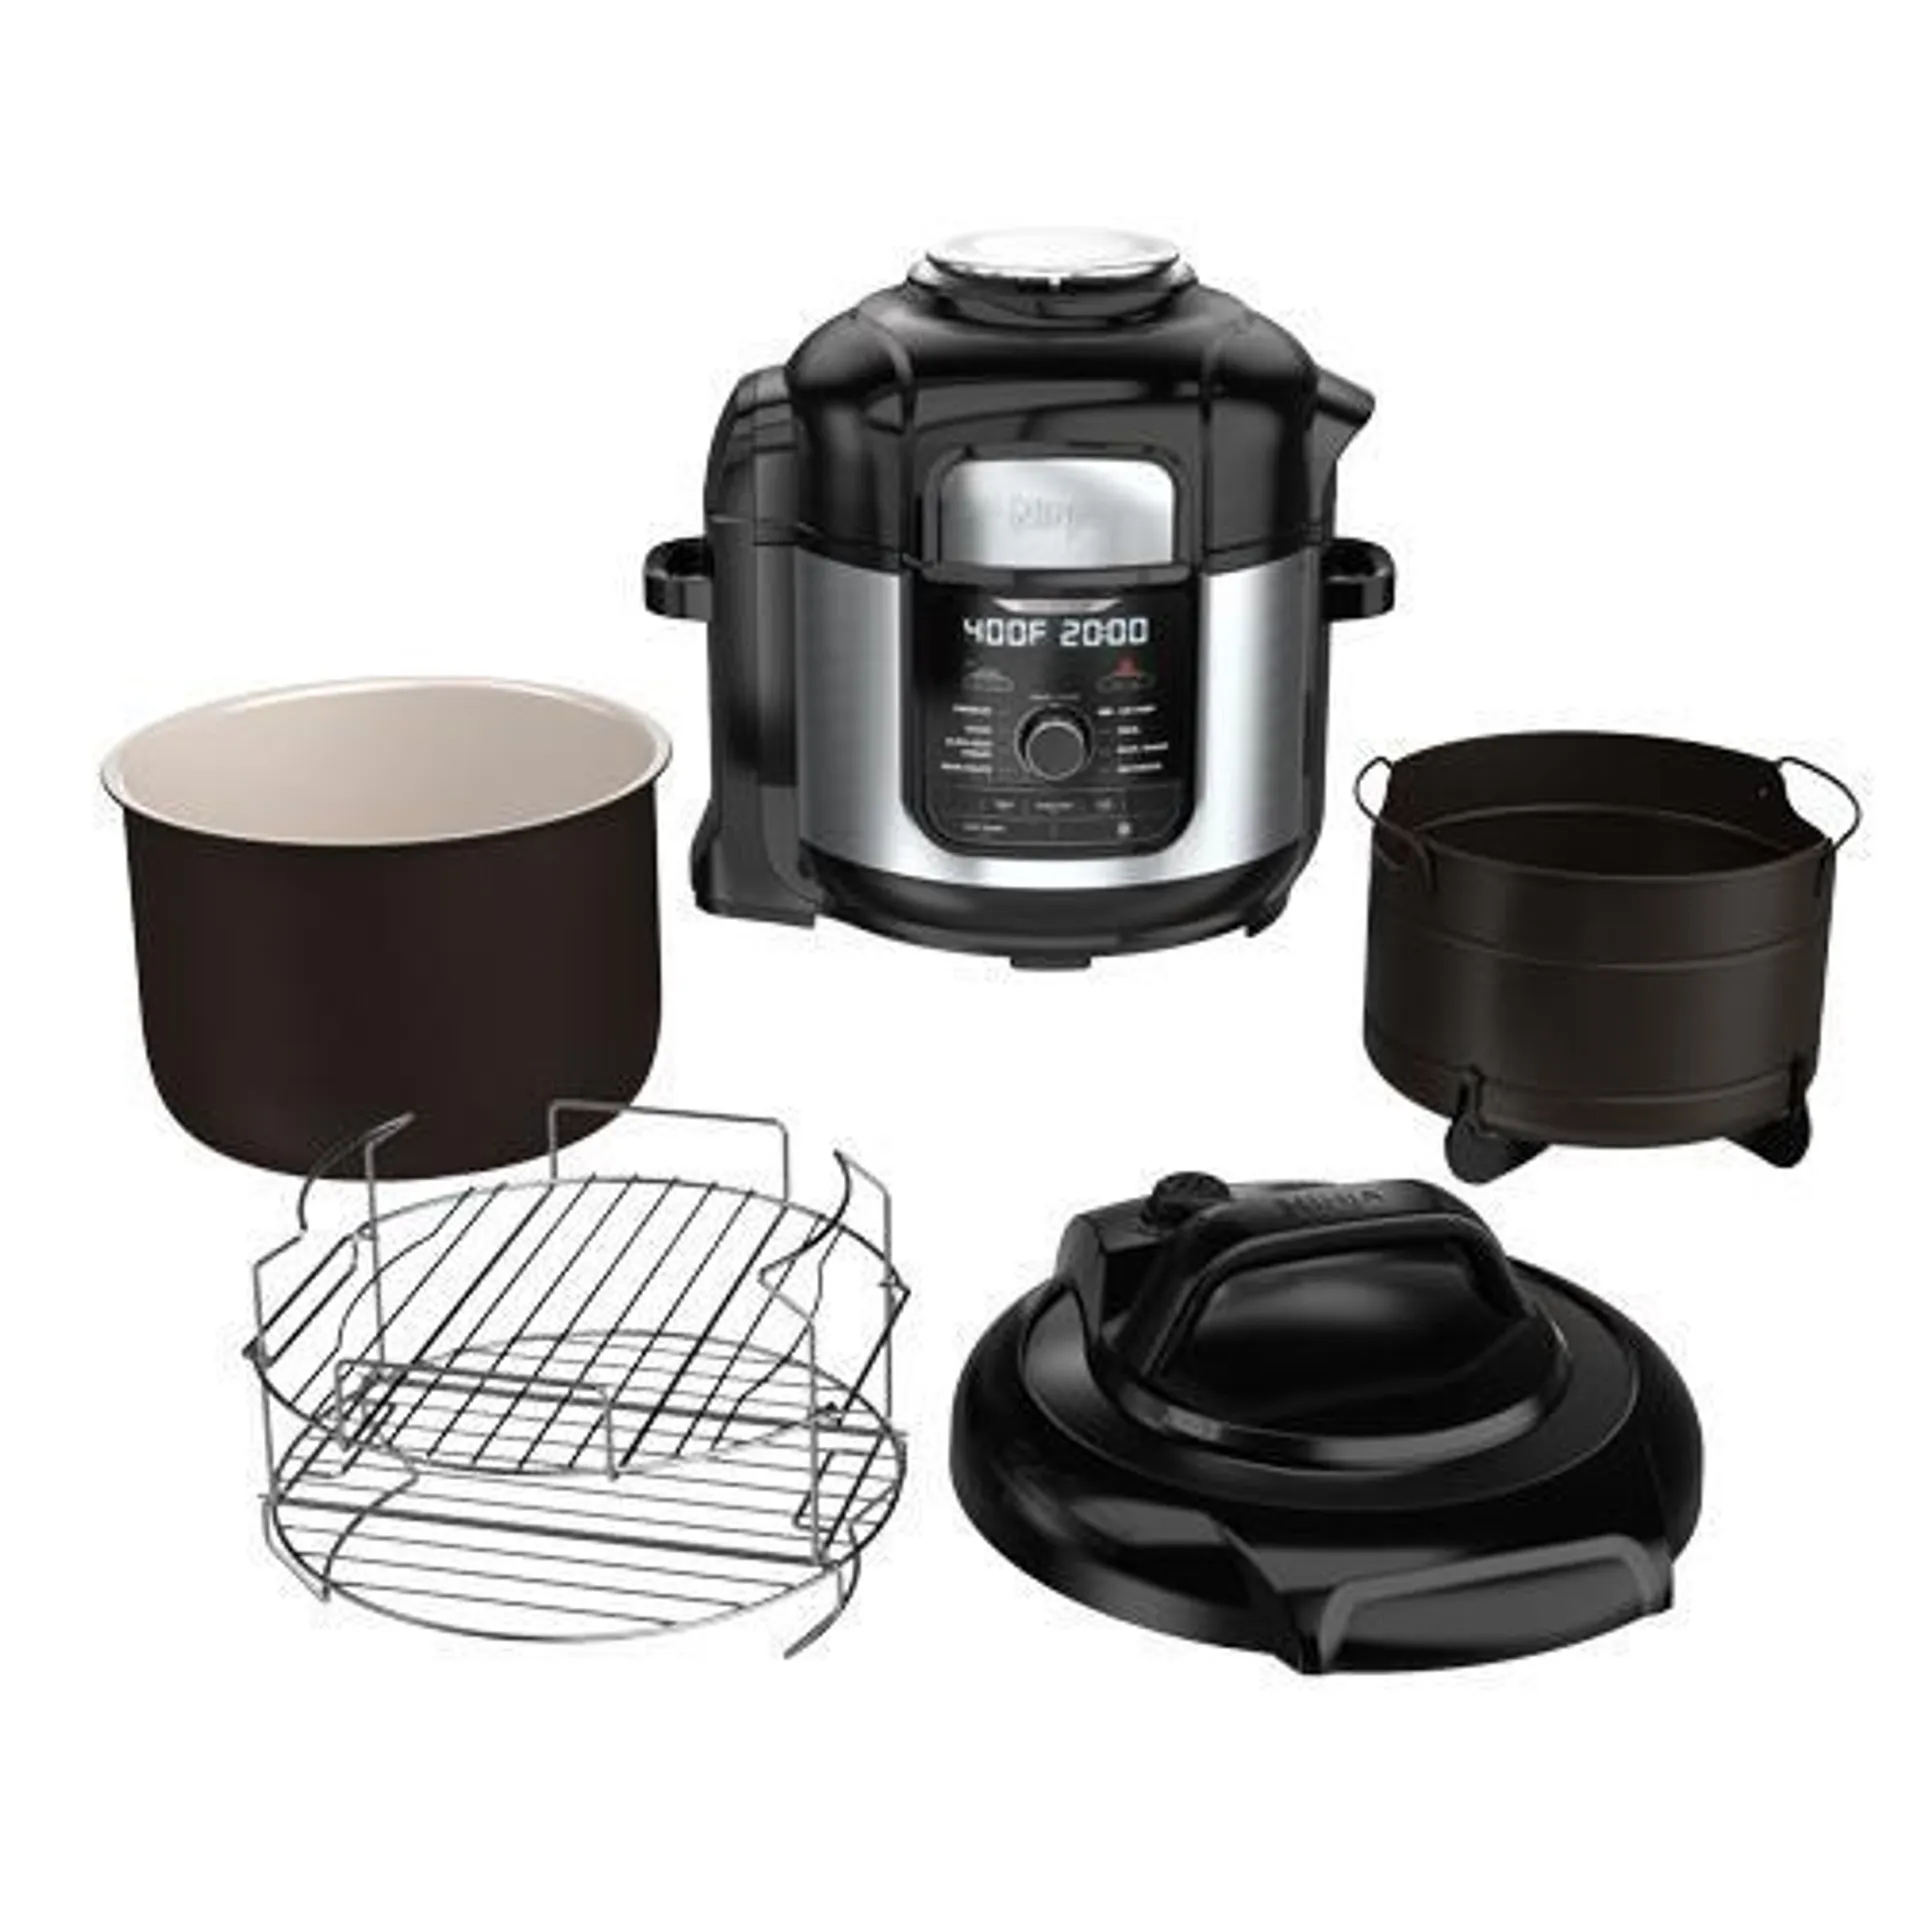 Foodi™ 8 Quart 9-In-1 Deluxe XL Pressure Cooker And Air Fryer